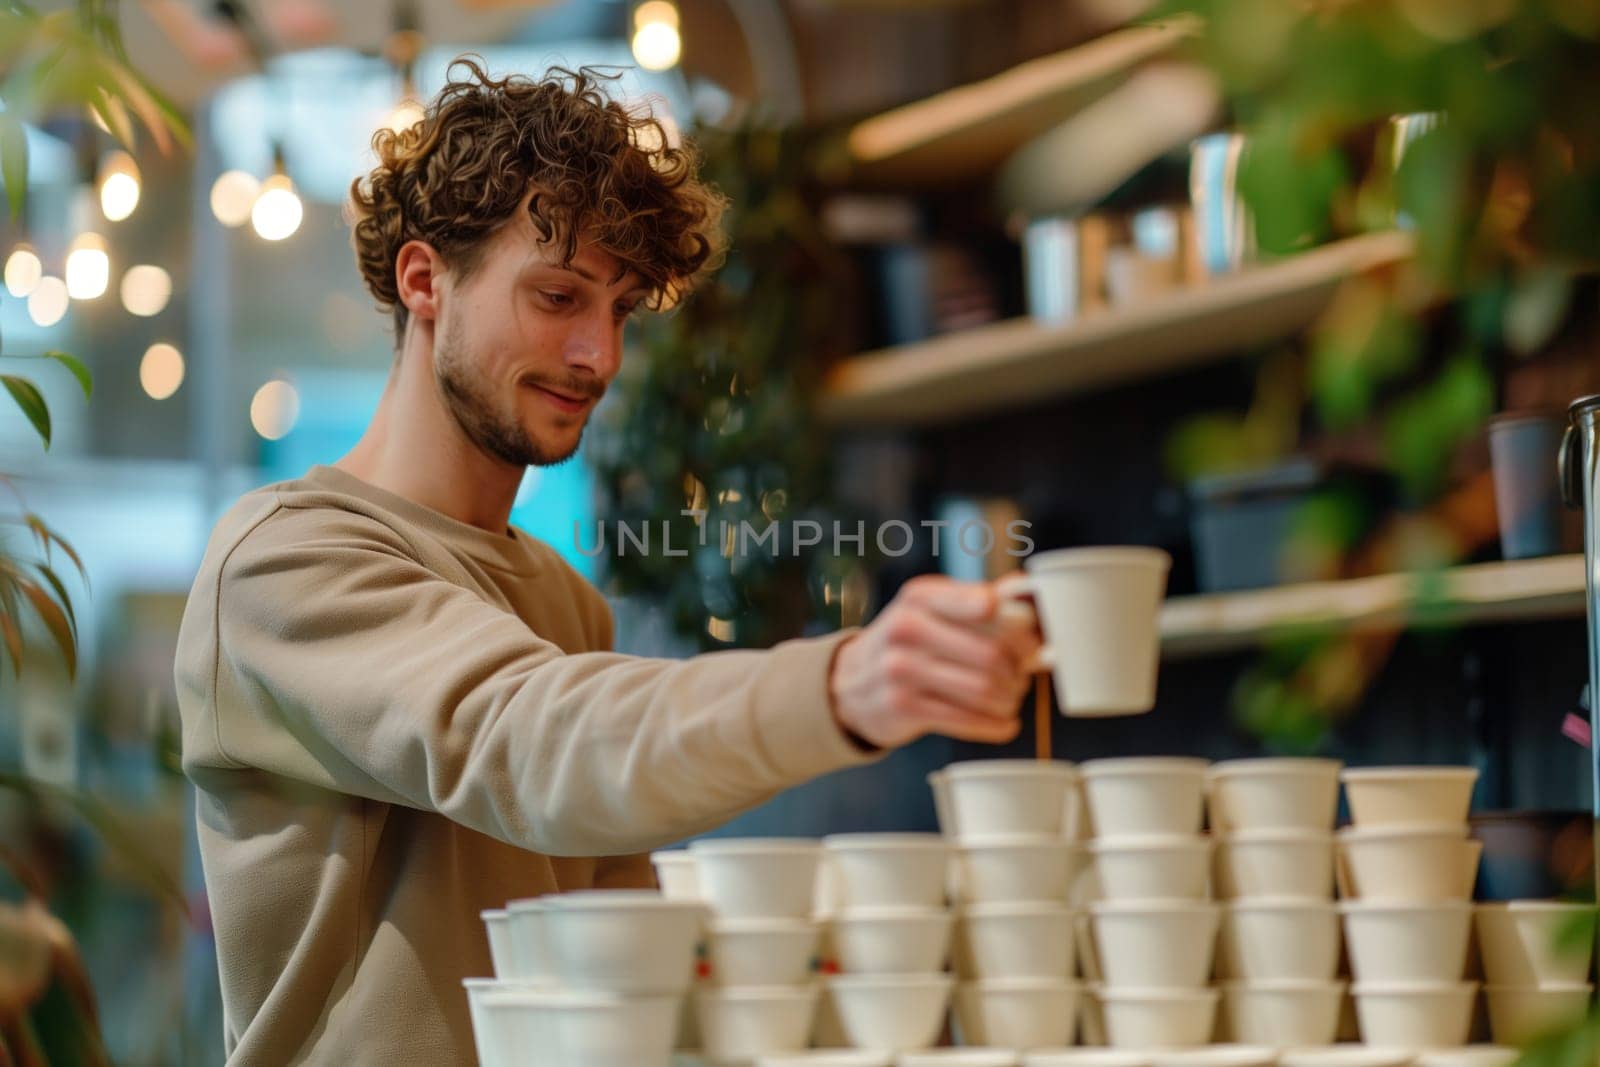 Man pours coffee into a cup on a wooden table, in a cafe by richwolf